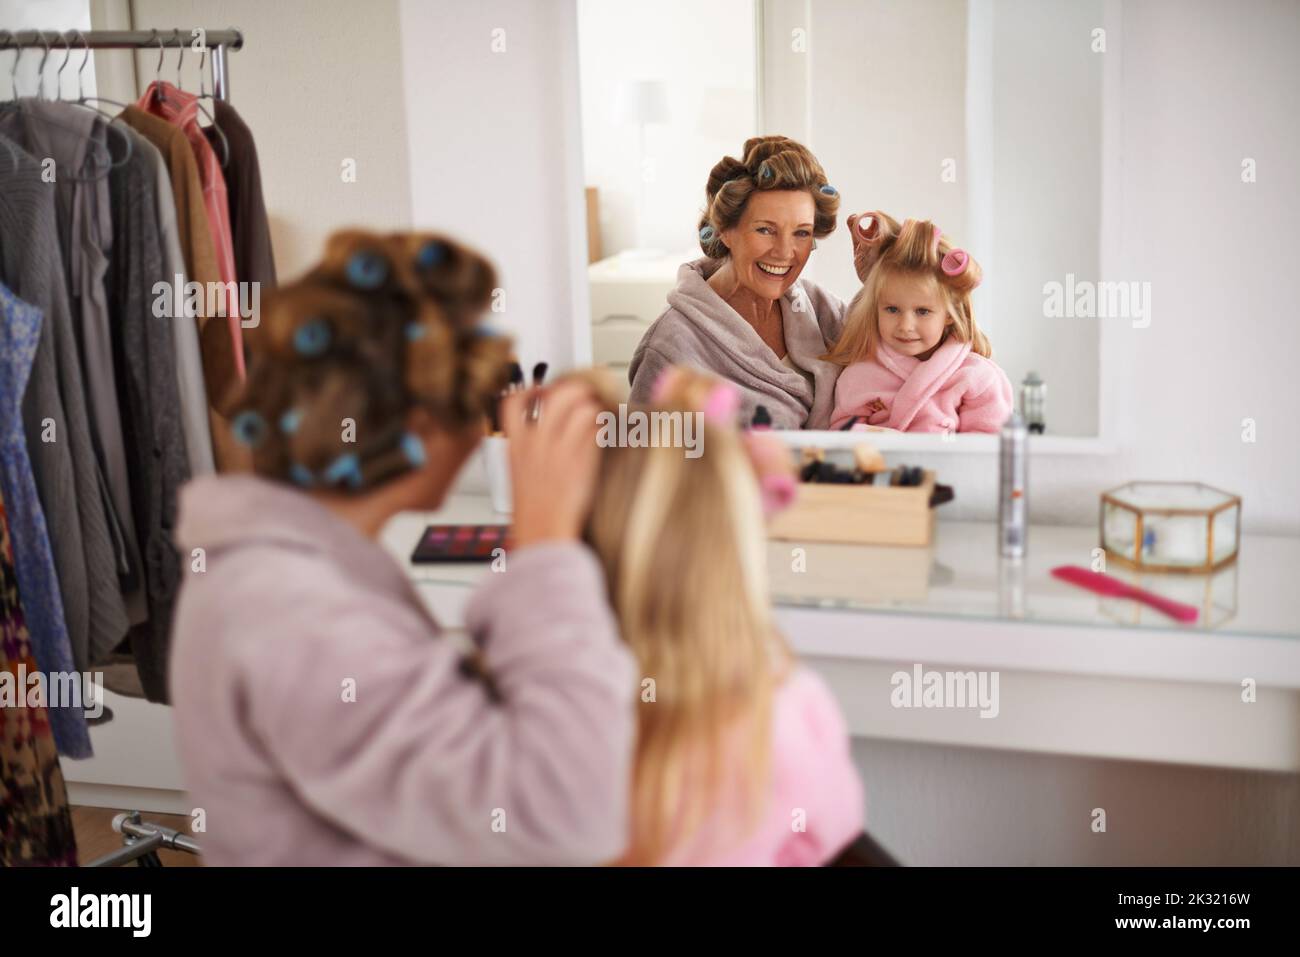 Giving her some curls. a young mother getting her daughter ready for an important event. Stock Photo